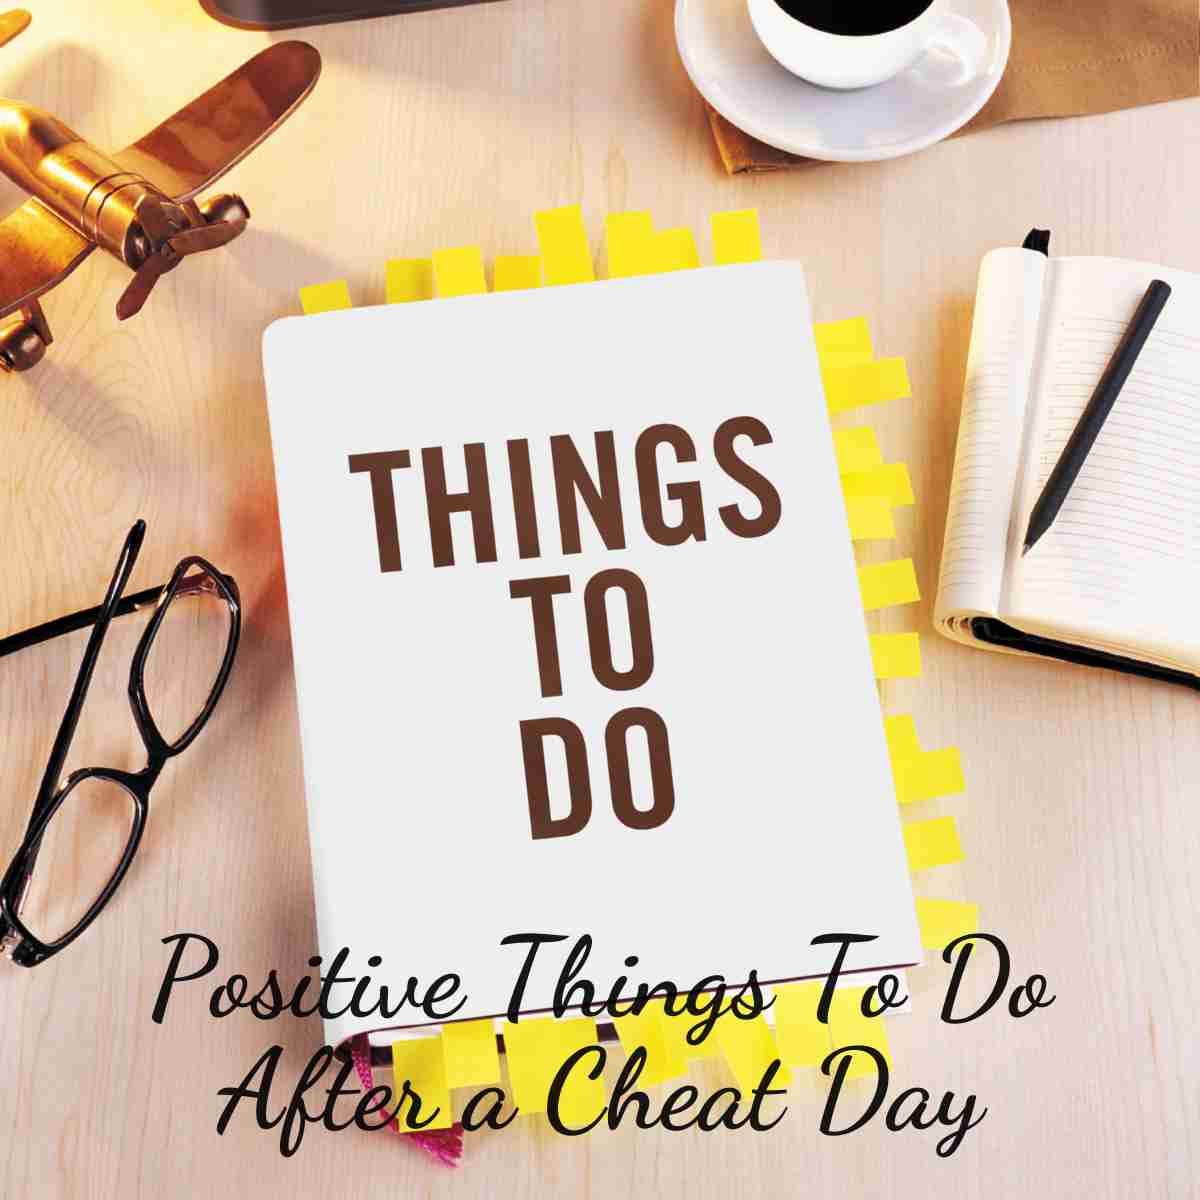 Positive Things To Do After a Cheat Day